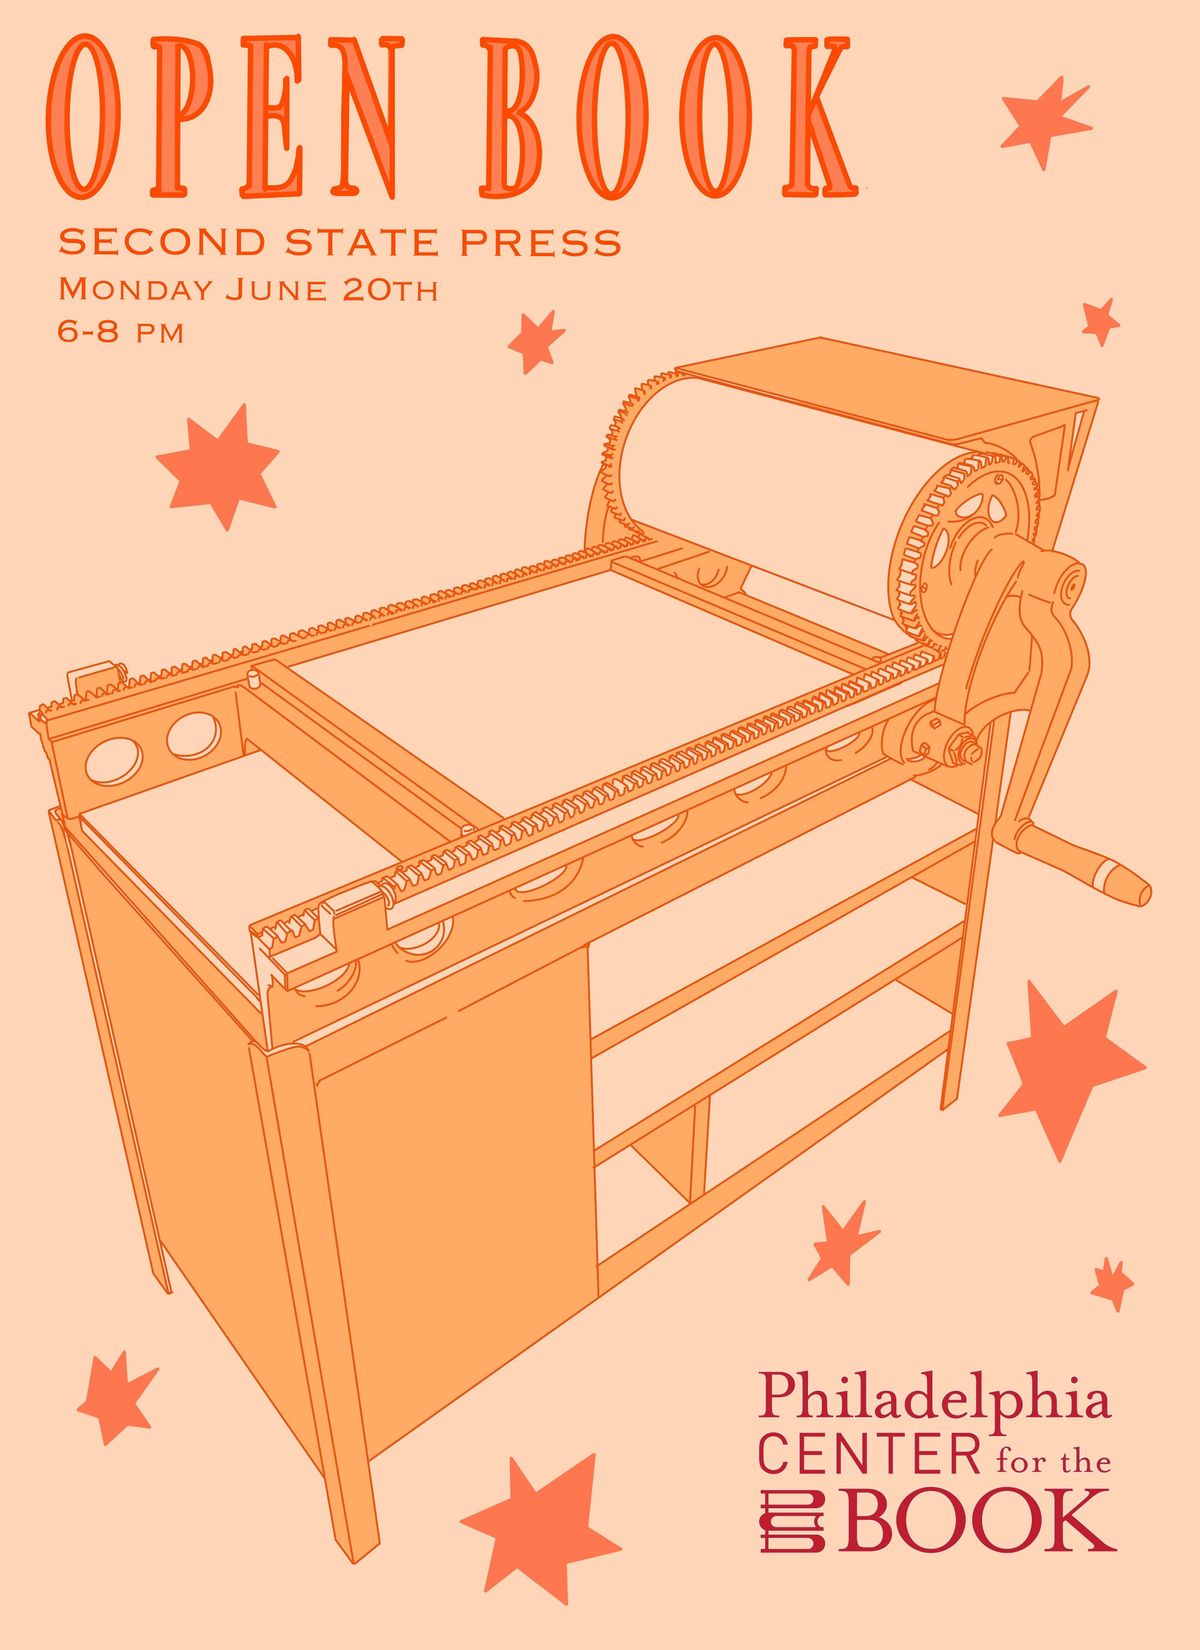 Open Book at Second State Press